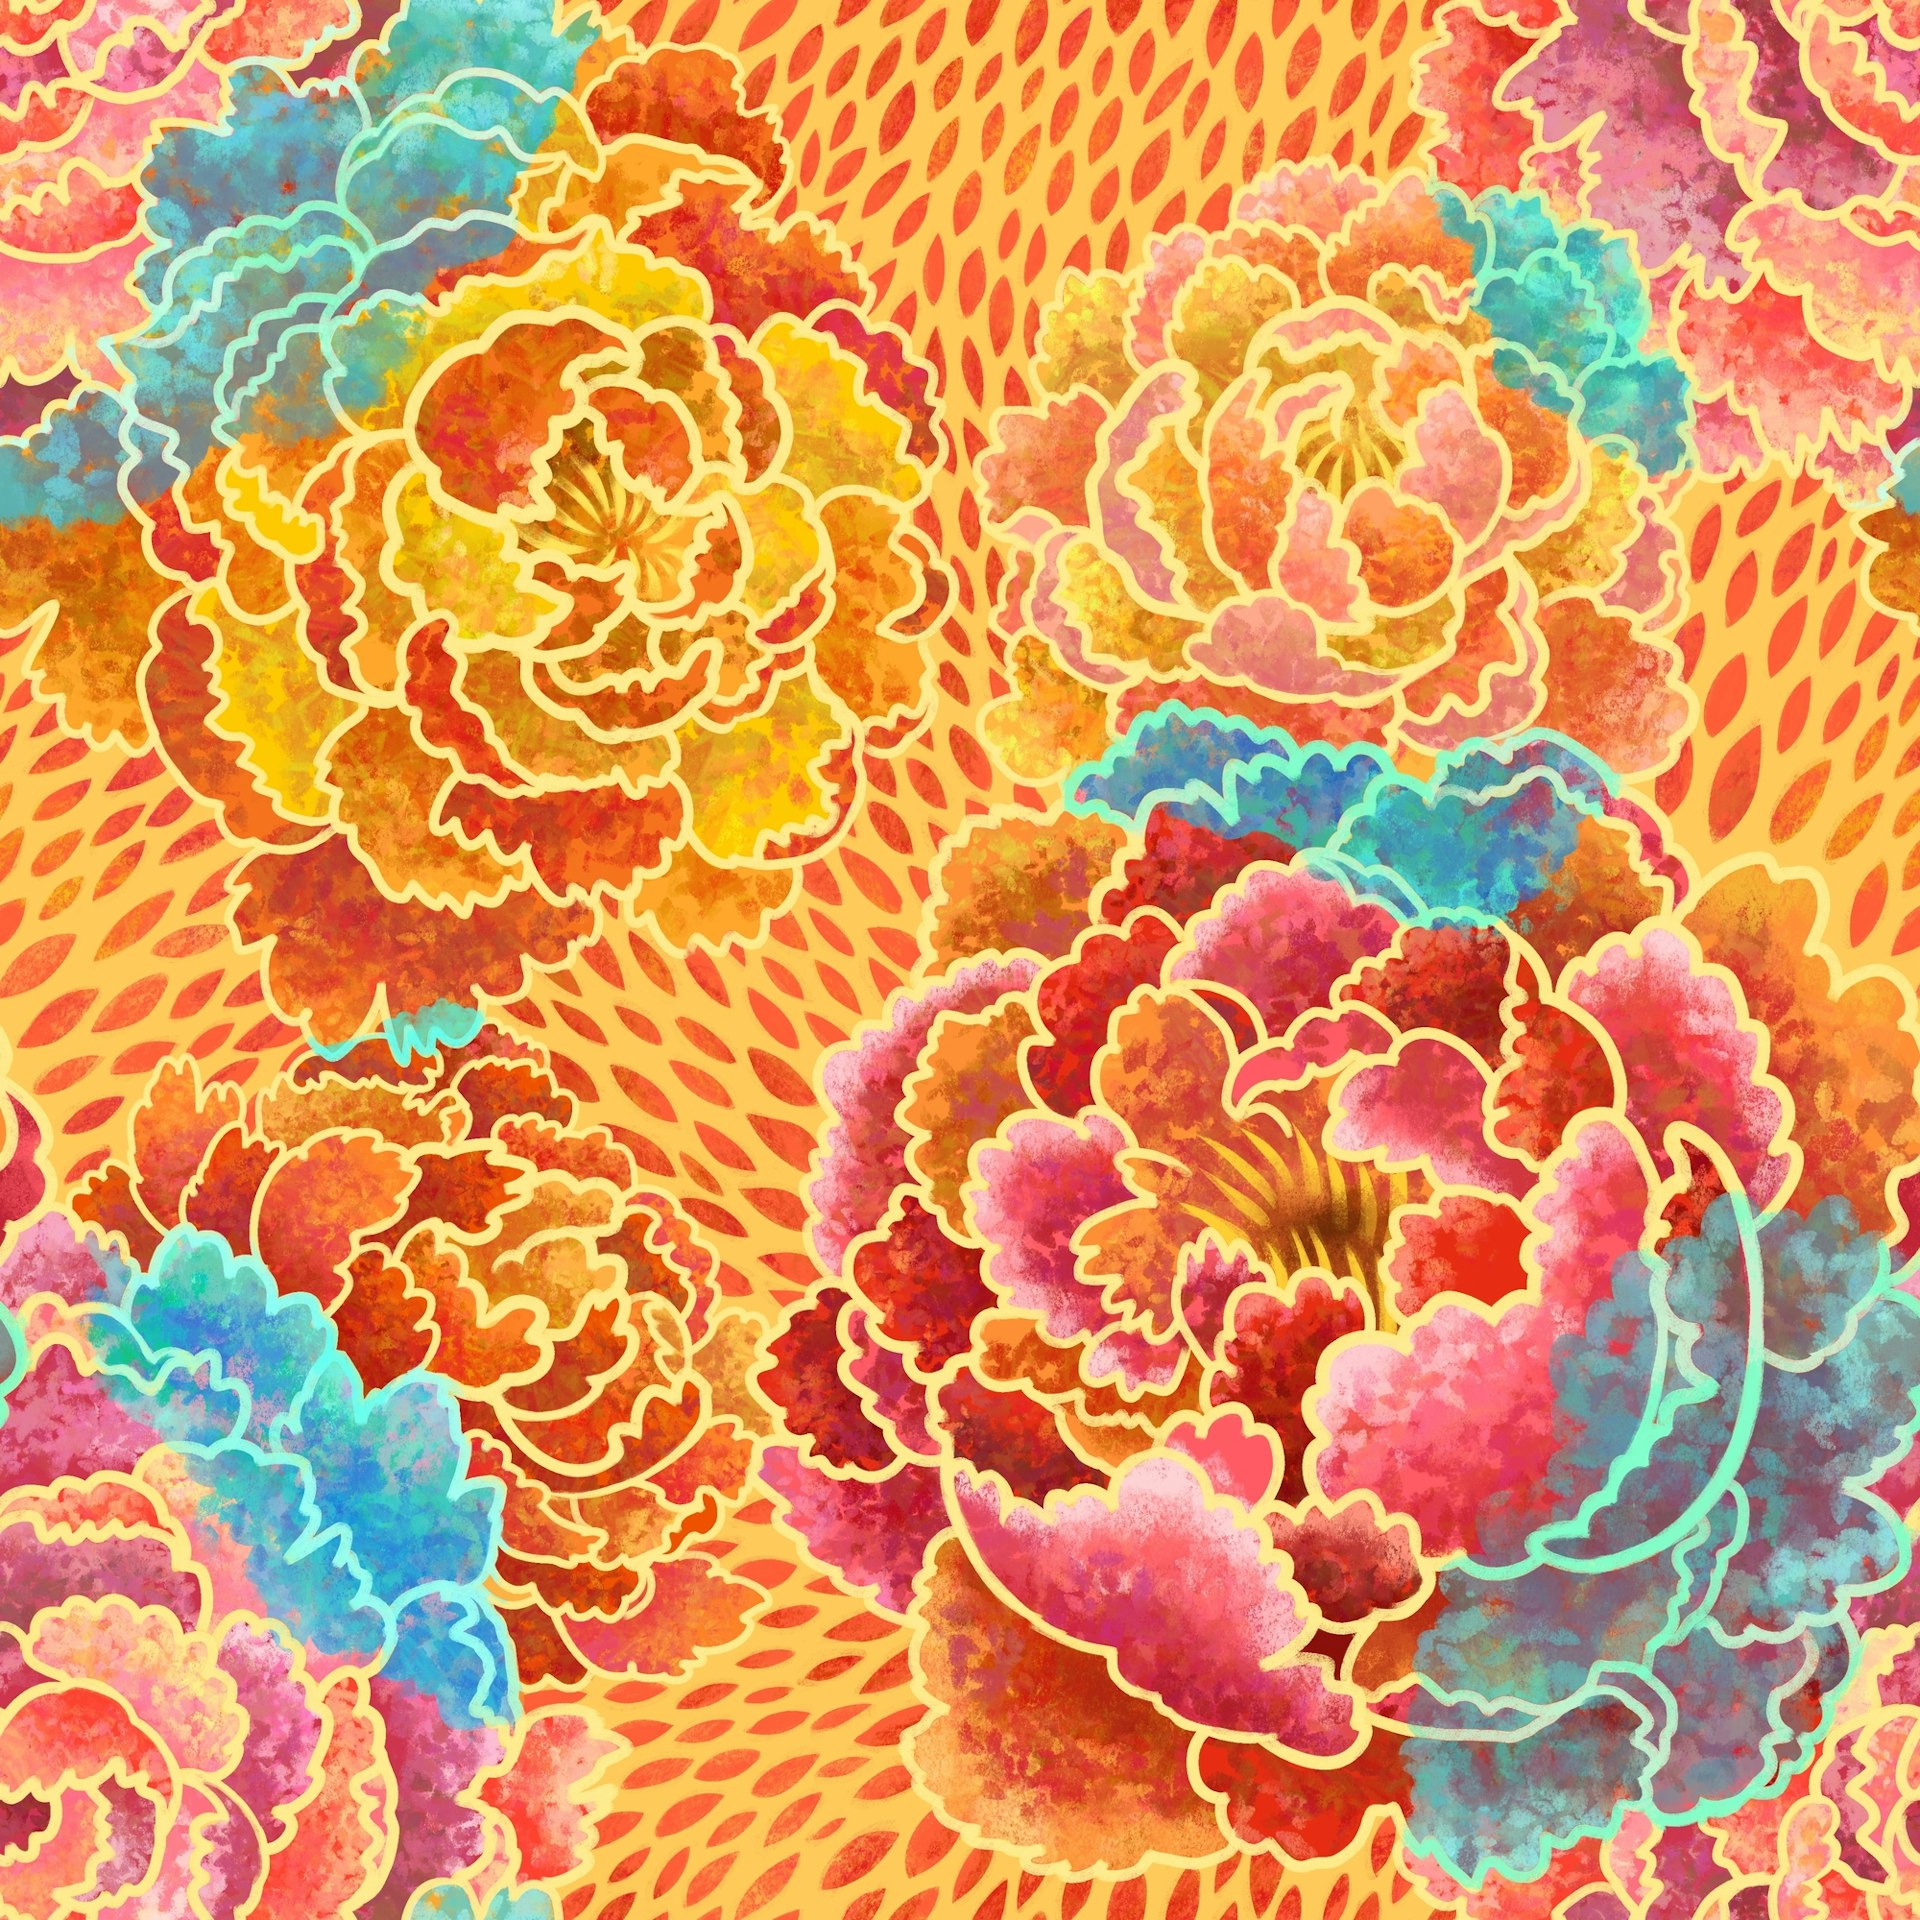 Digitally painted floral design of overlapping pink and orange peonies, done in a slightly graphic and textured style inspired by batik and Chinese papercuts. The peonies are different hues of pink and orange, while the outlines are golden, and their overlapping parts are light blue and turquoise, against a golden background with a red pattern.